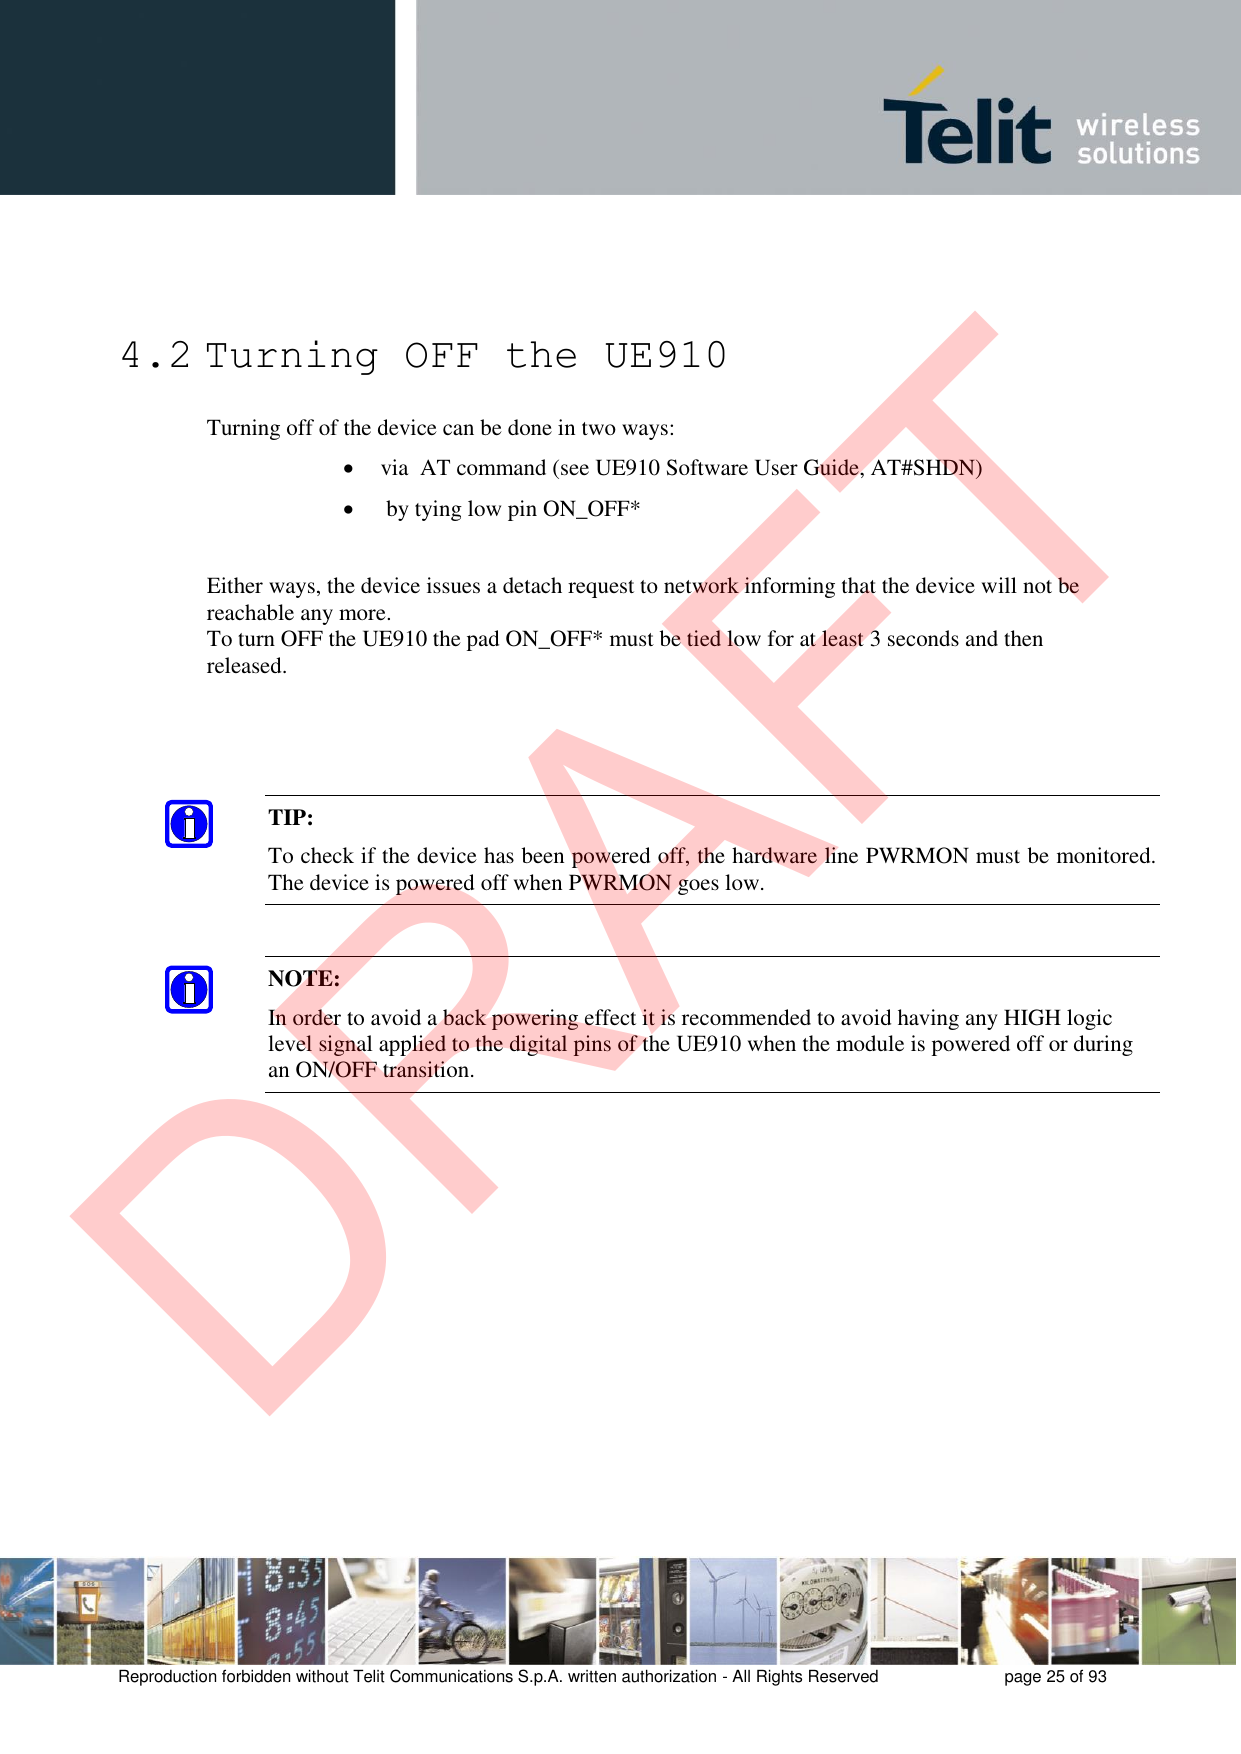 Reproduction forbidden without Telit Communications S.p.A. written authorization - All Rights Reserved  page 25 of 93 4.2 Turning OFF the UE910 Turning off of the device can be done in two ways: via  AT command (see UE910 Software User Guide, AT#SHDN)by tying low pin ON_OFF*Either ways, the device issues a detach request to network informing that the device will not be reachable any more.  To turn OFF the UE910 the pad ON_OFF* must be tied low for at least 3 seconds and then released.  TIP: To check if the device has been powered off, the hardware line PWRMON must be monitored. The device is powered off when PWRMON goes low. NOTE: In order to avoid a back powering effect it is recommended to avoid having any HIGH logic level signal applied to the digital pins of the UE910 when the module is powered off or during an ON/OFF transition. DRAFT